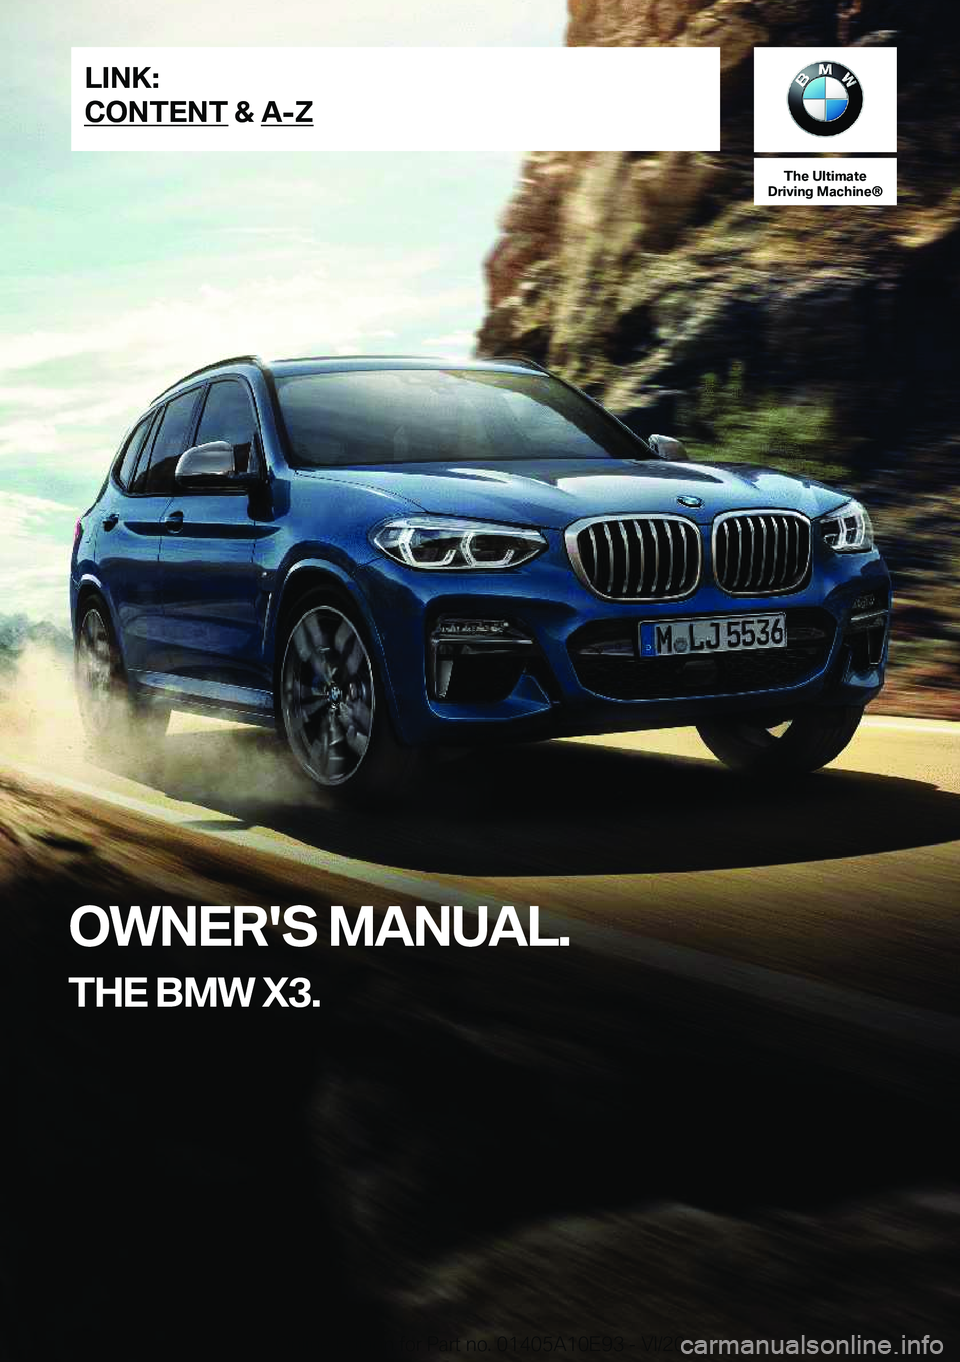 BMW X3 2021  Owners Manual �T�h�e��U�l�t�i�m�a�t�e
�D�r�i�v�i�n�g��M�a�c�h�i�n�e�n
�O�W�N�E�R�'�S��M�A�N�U�A�L�.
�T�H�E��B�M�W��X�3�.�L�I�N�K�:
�C�O�N�T�E�N�T��&��A�-�Z�O�n�l�i�n�e��E�d�i�t�i�o�n��f�o�r��P�a�r�t�